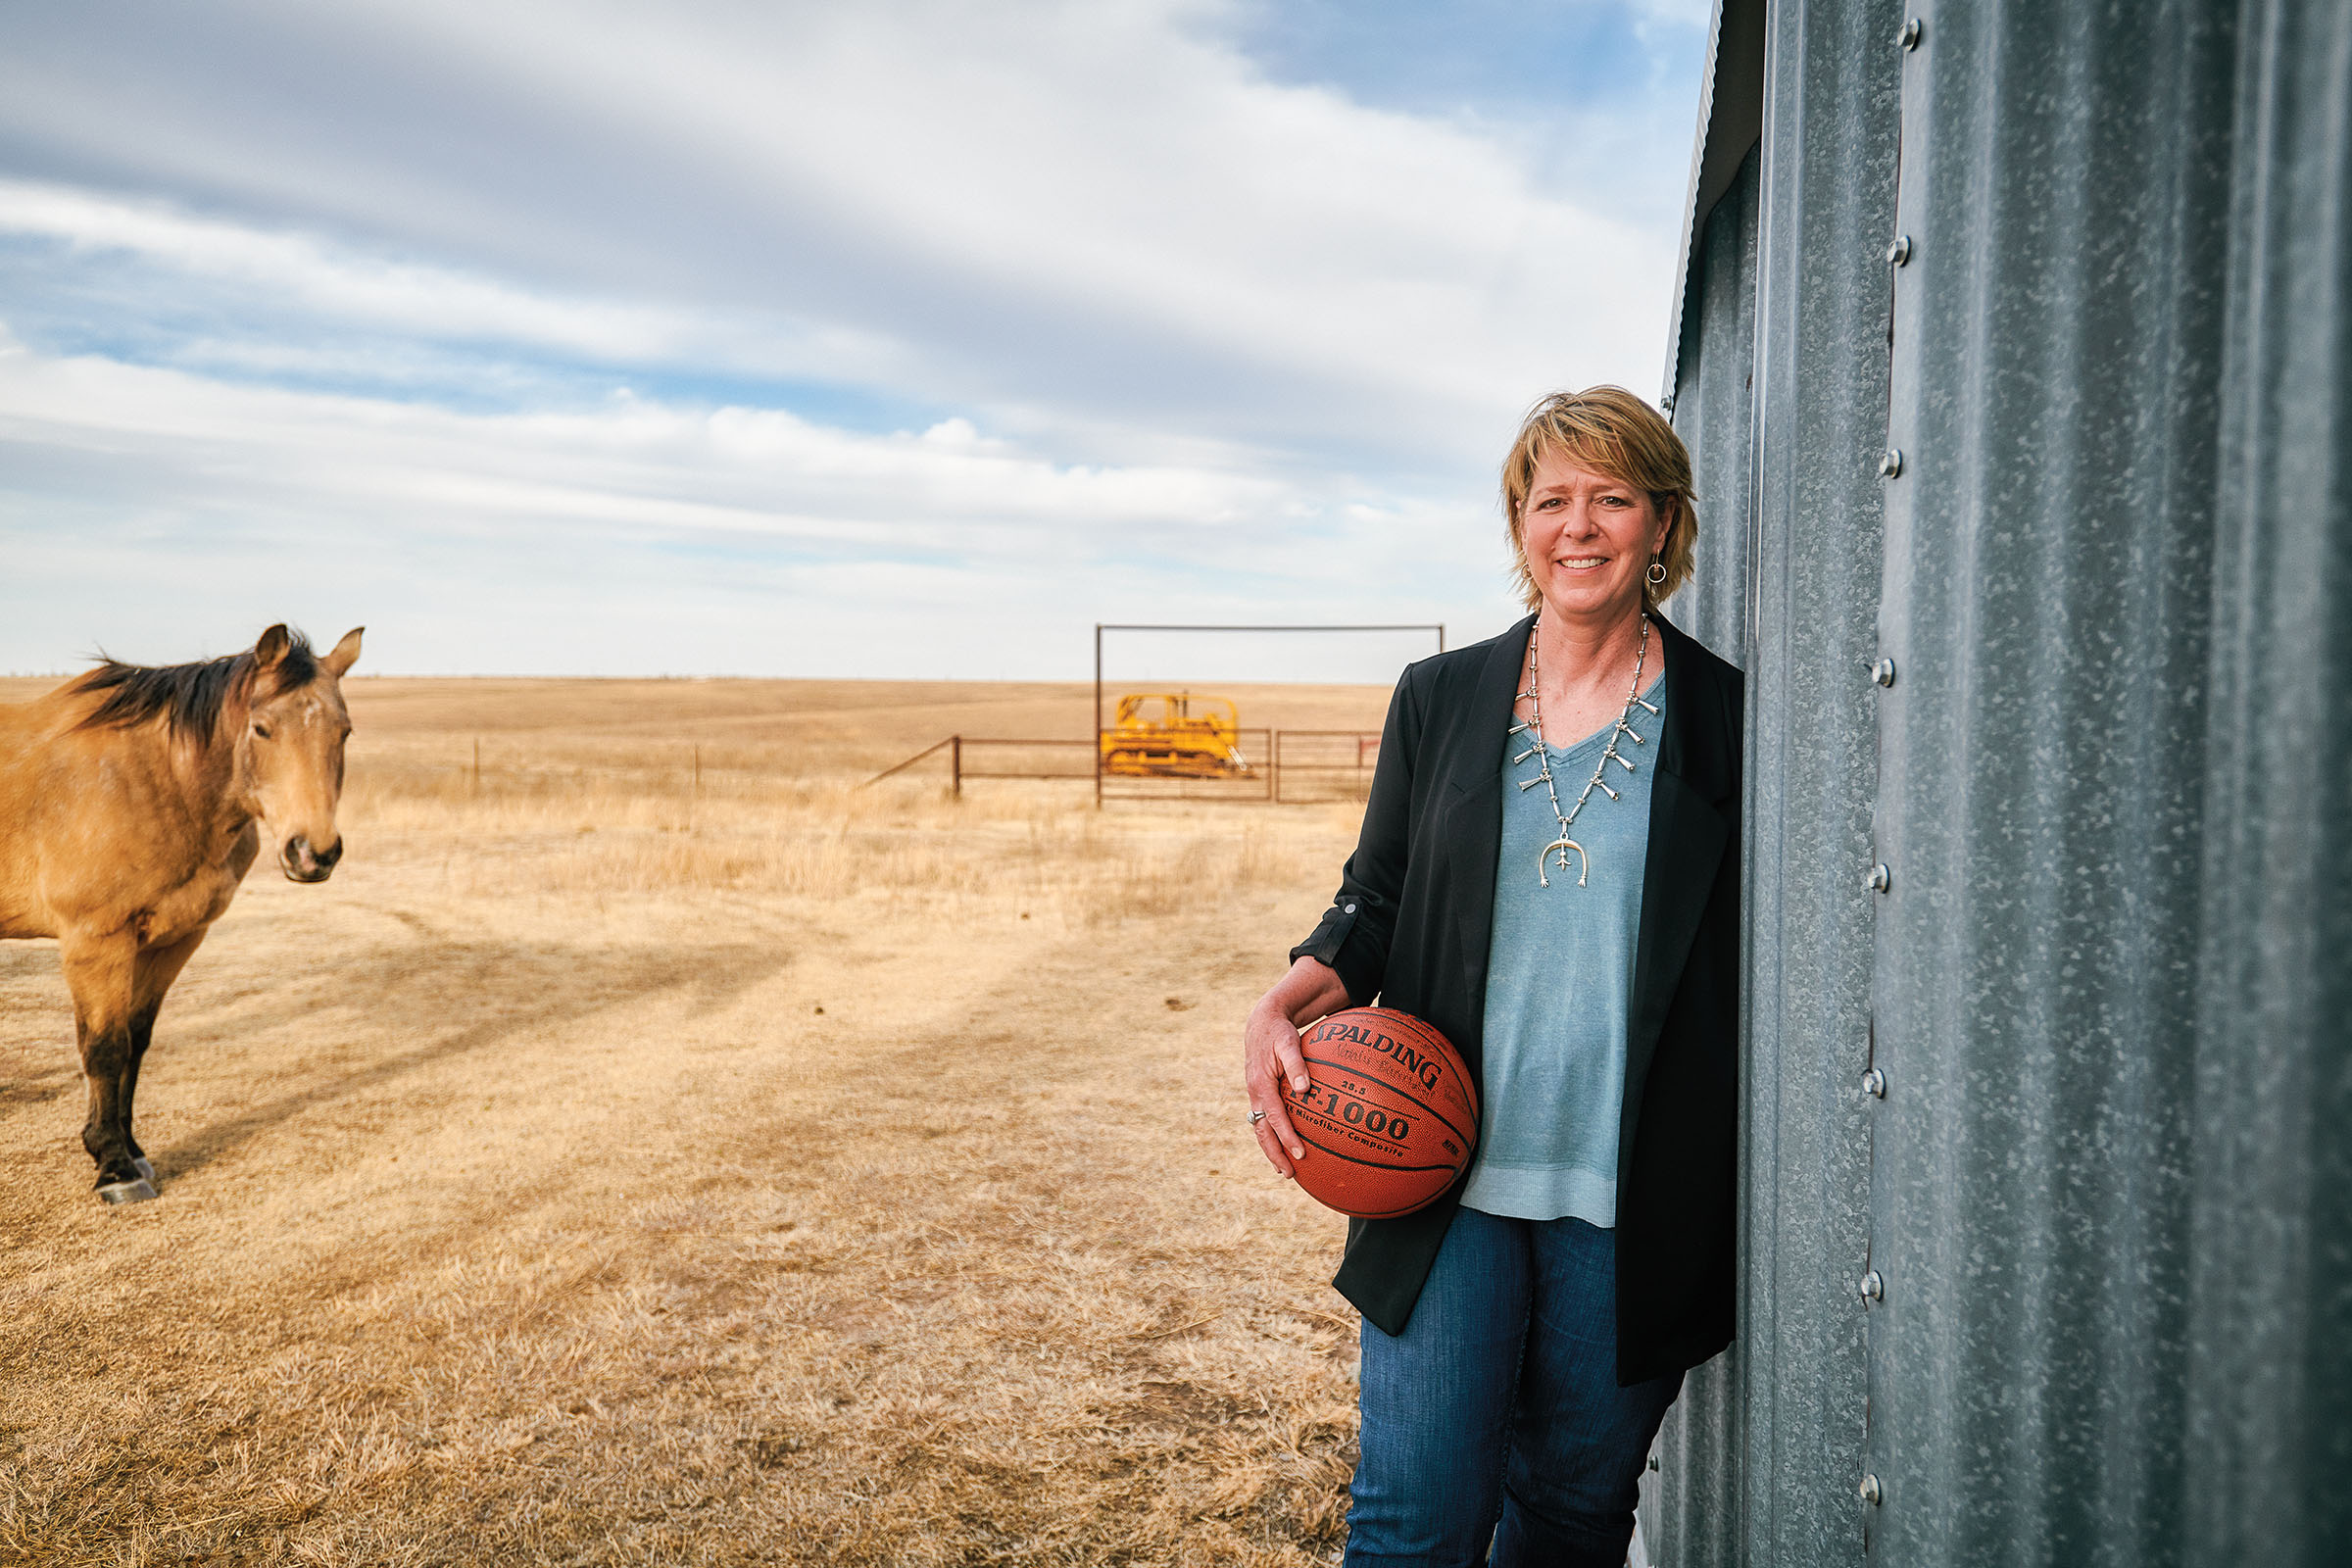 A woman in a blue shirt holds a basketball while leaning against a metal building on a farm